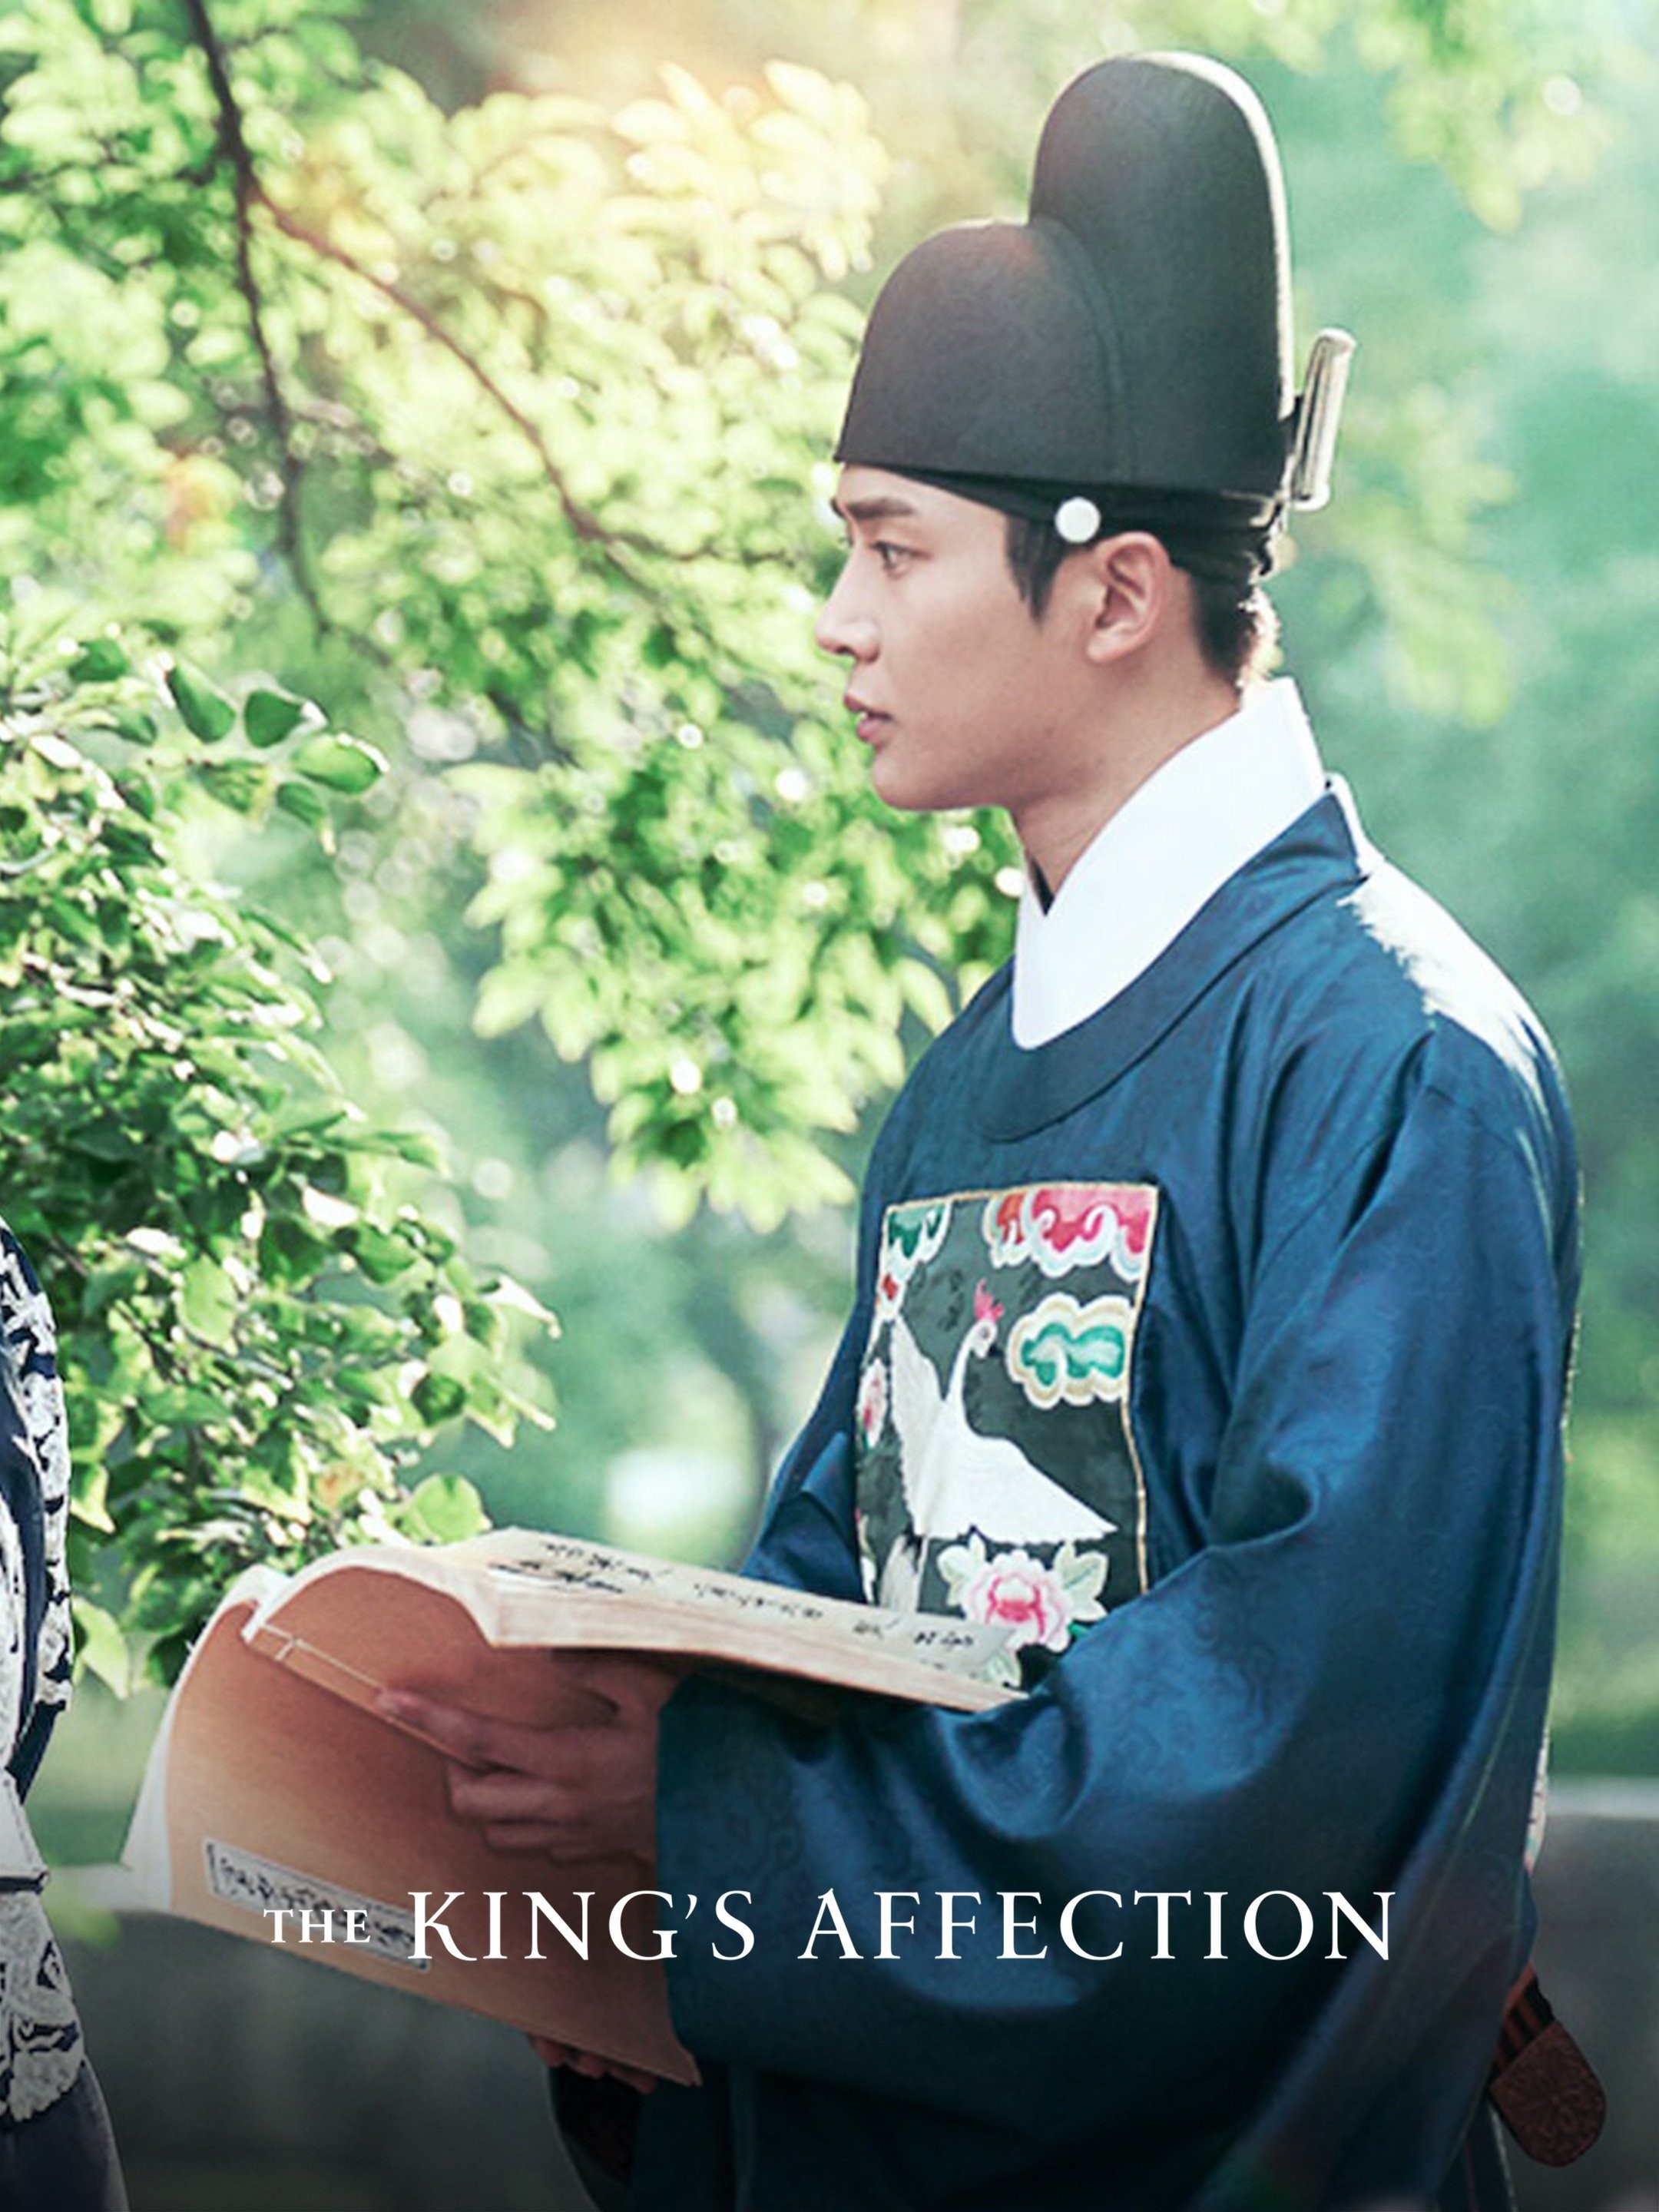 The King's Affection, Official Trailer